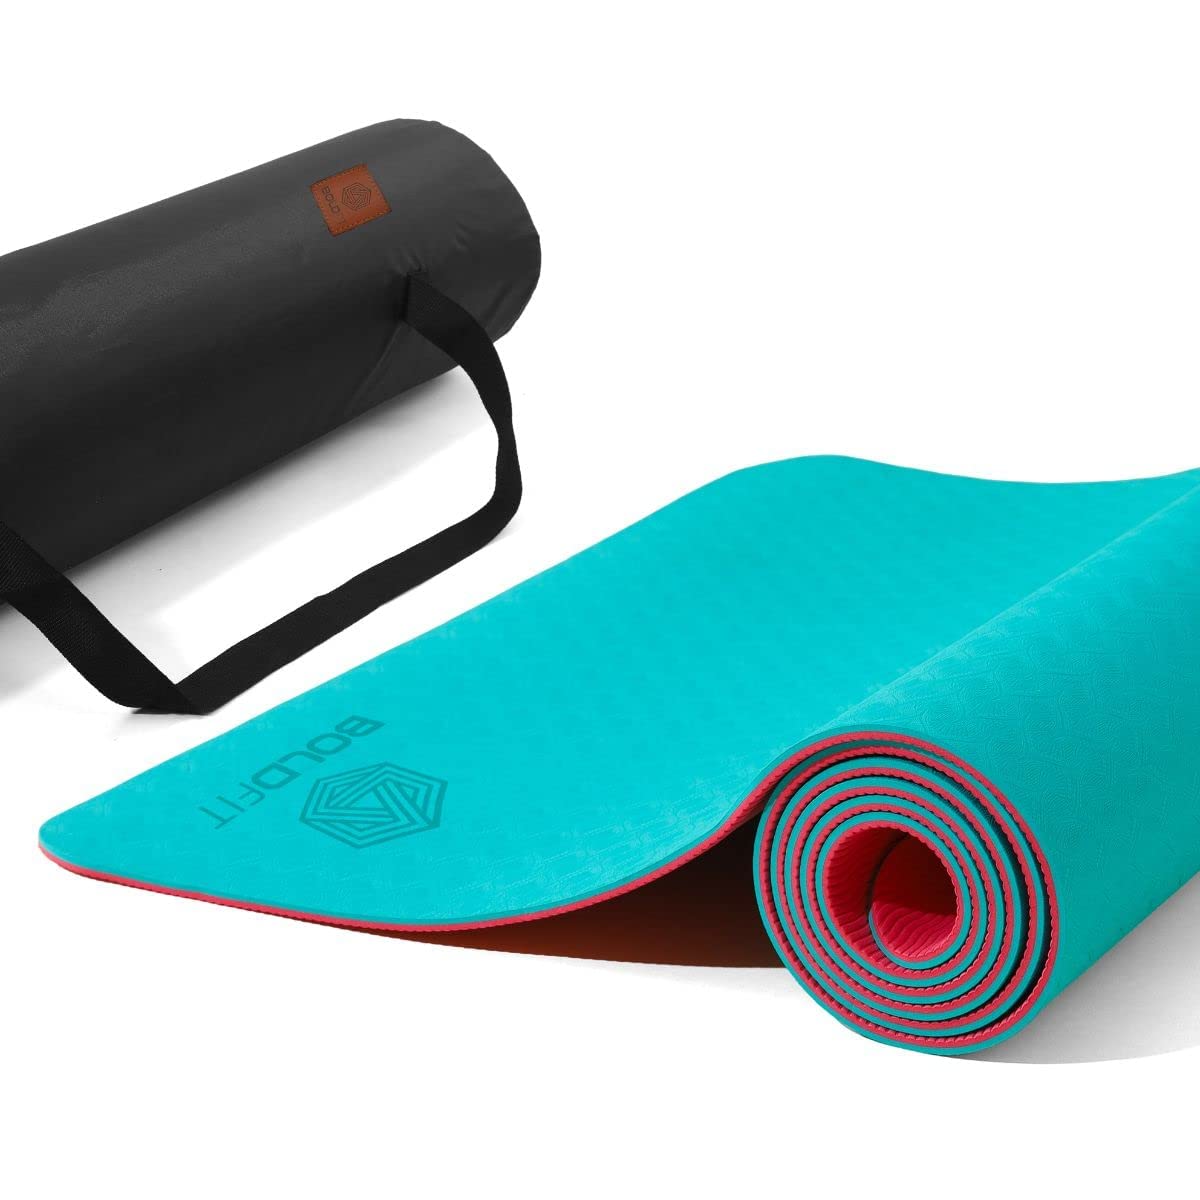 Buy Boldfit Yoga Mat Dark-Light Blue & Boldfit Resistance Band Set with  Handles (11 Pieces Tube Set), Multicolor, L Online at Low Prices in India 